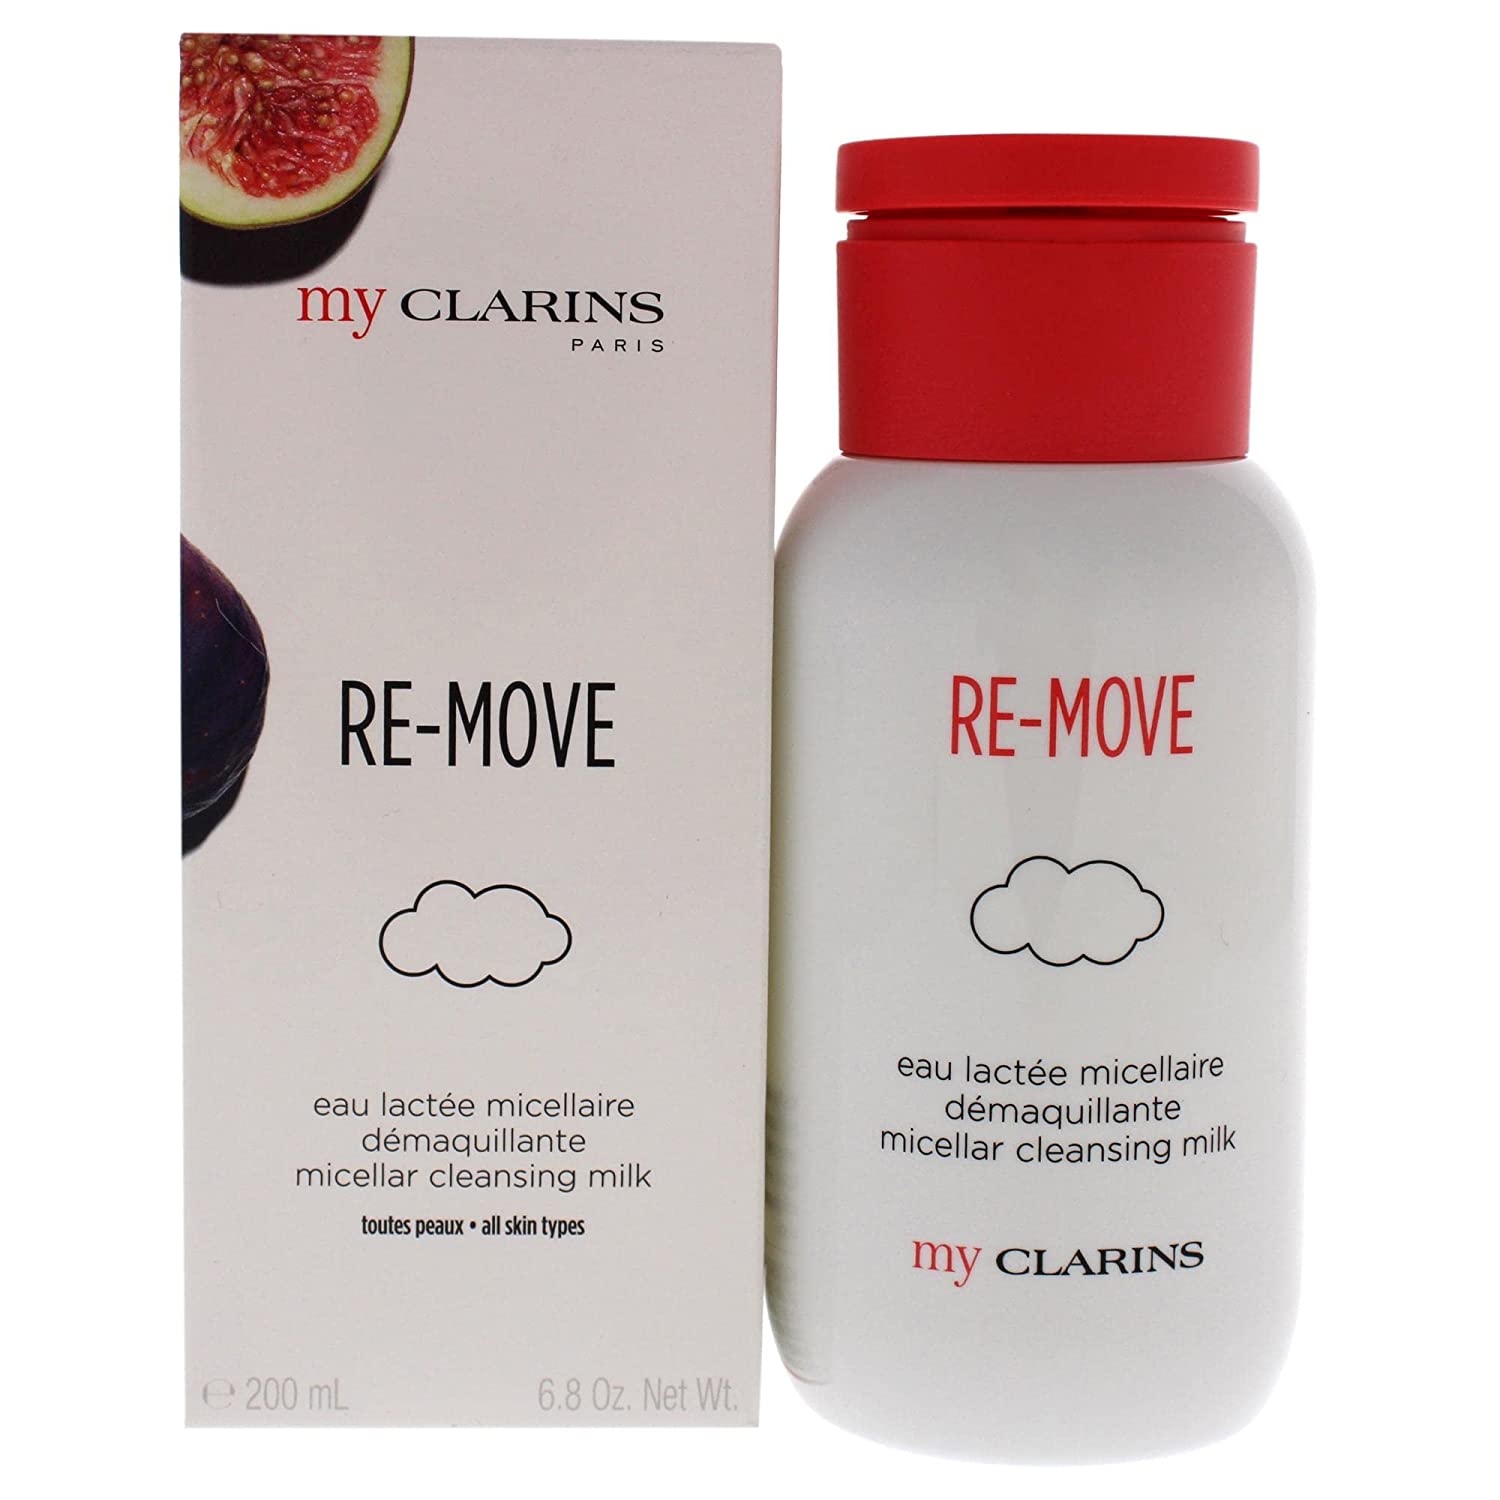 My Clarins RE-MOVE Micellar Cleanising Milk